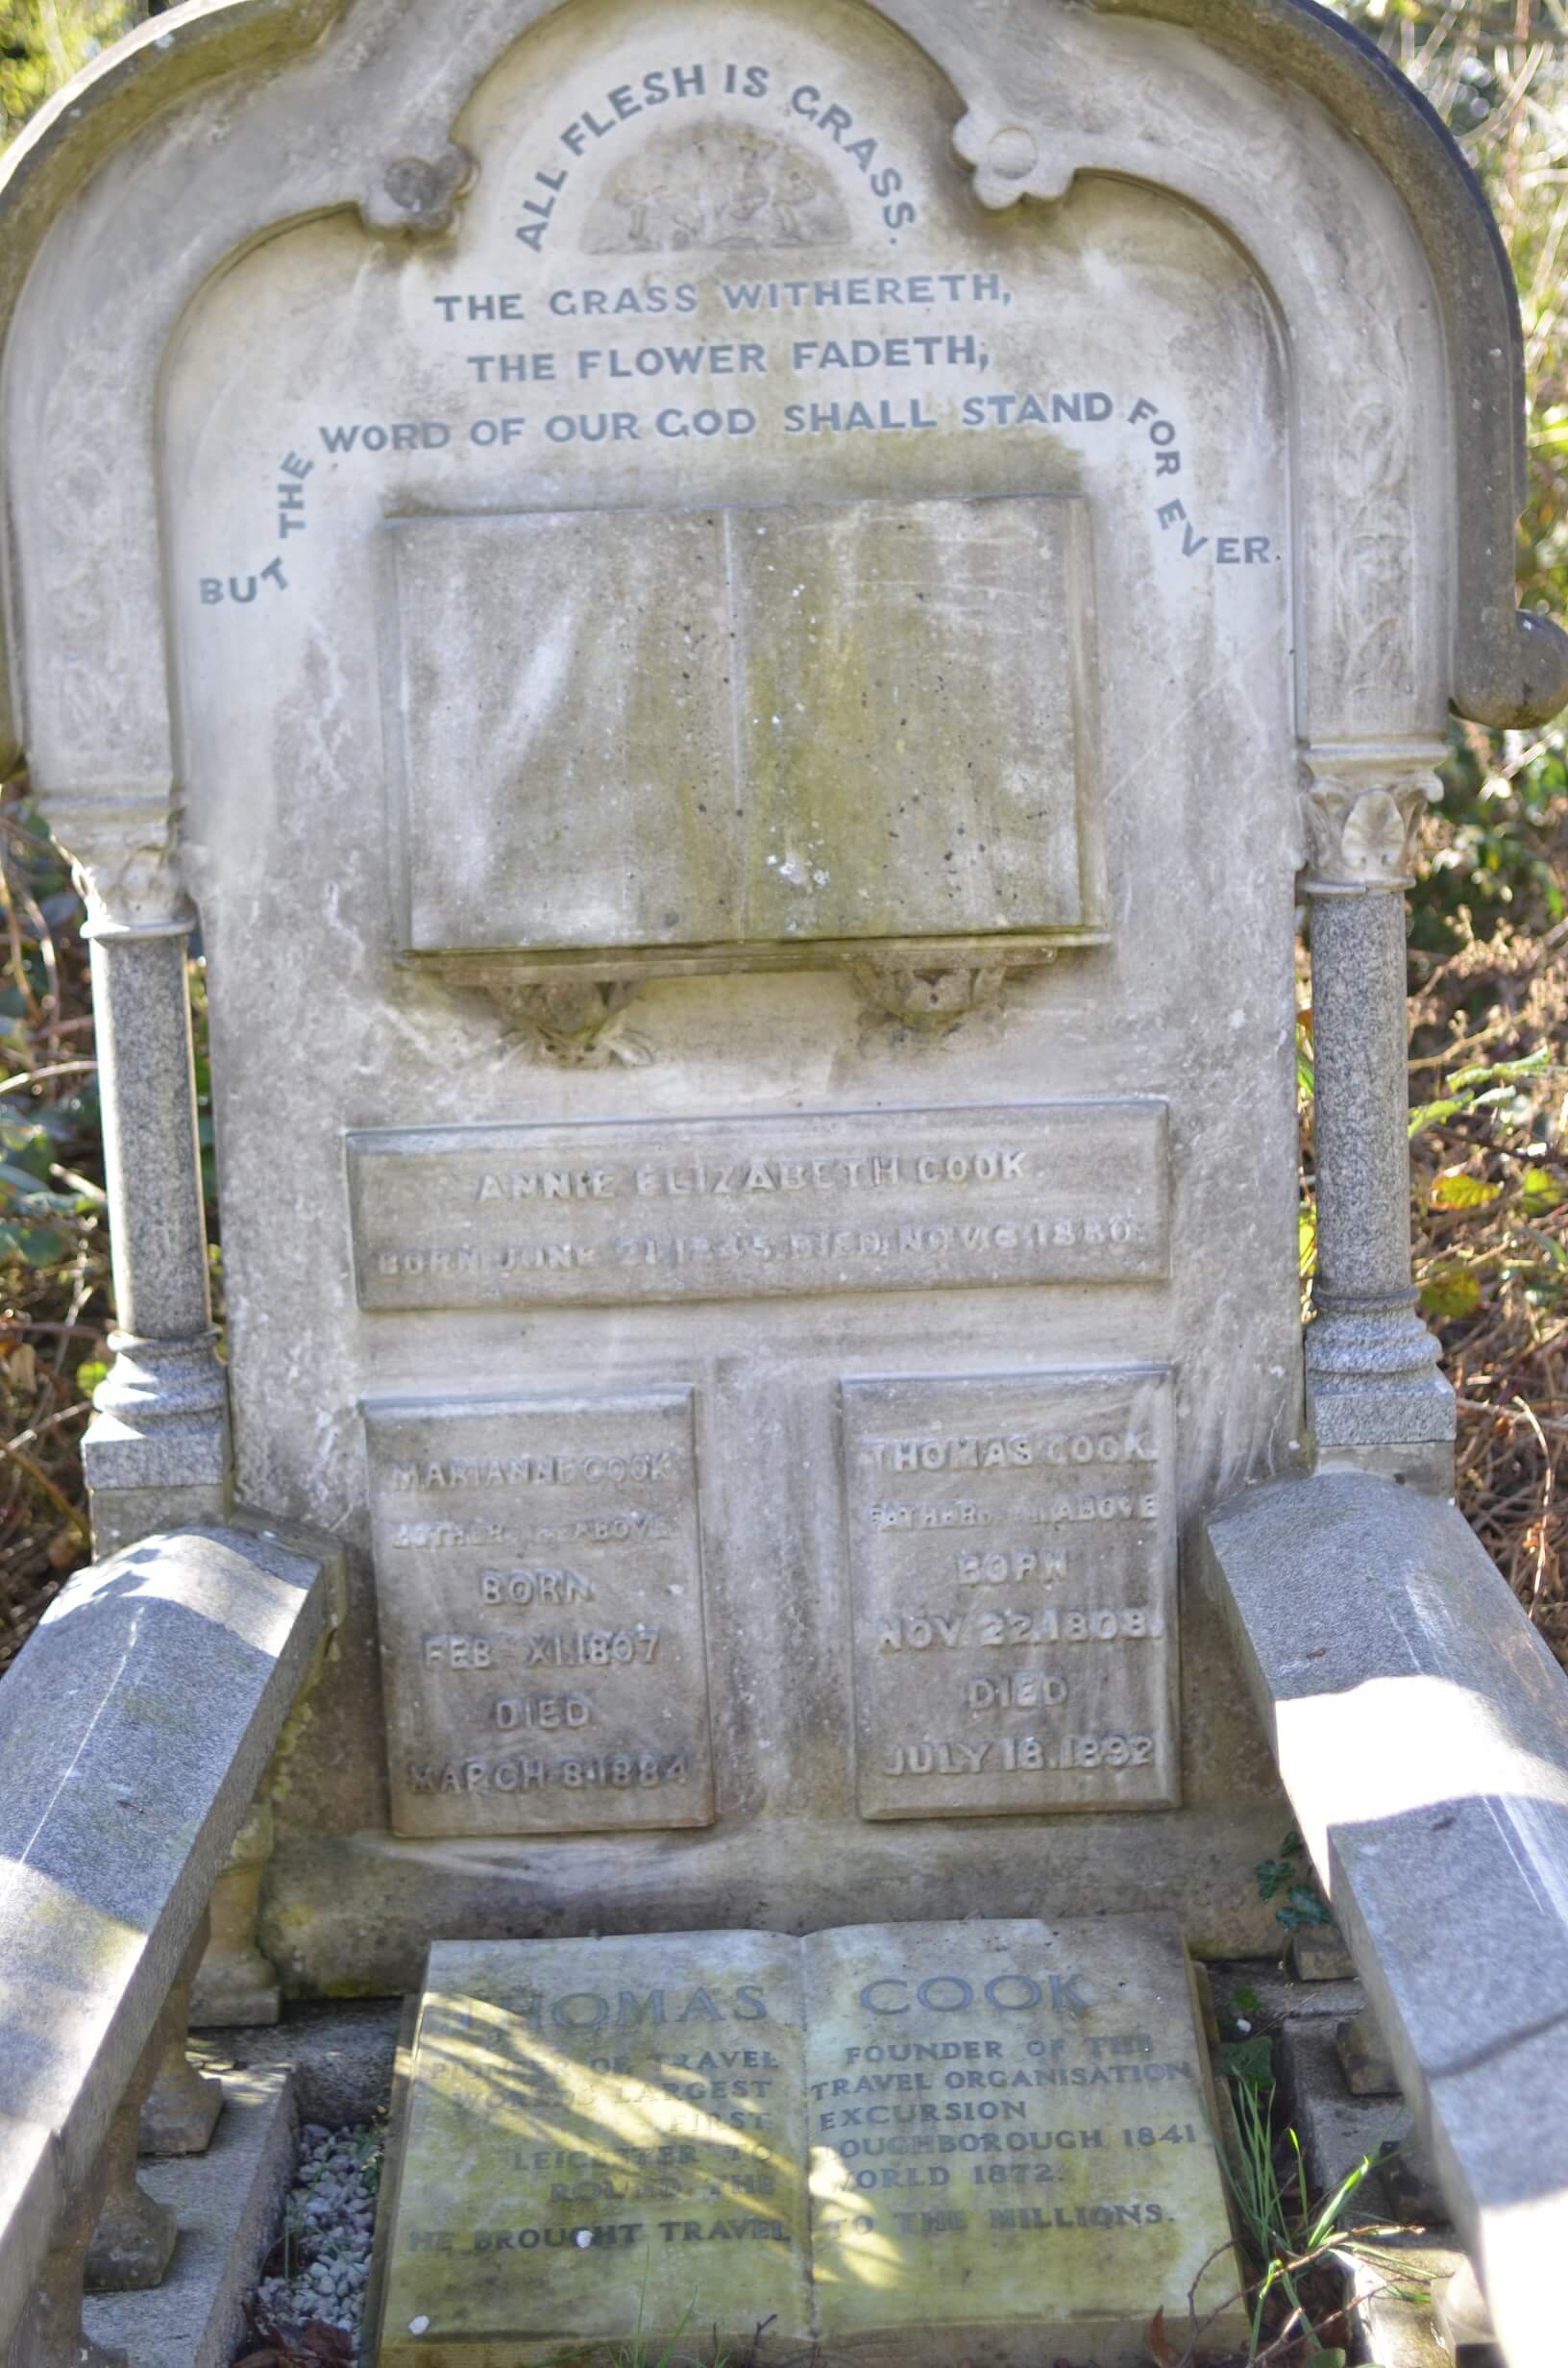 Image of the headstone of Thomas Cook in Welford Road Cemetery Leicester